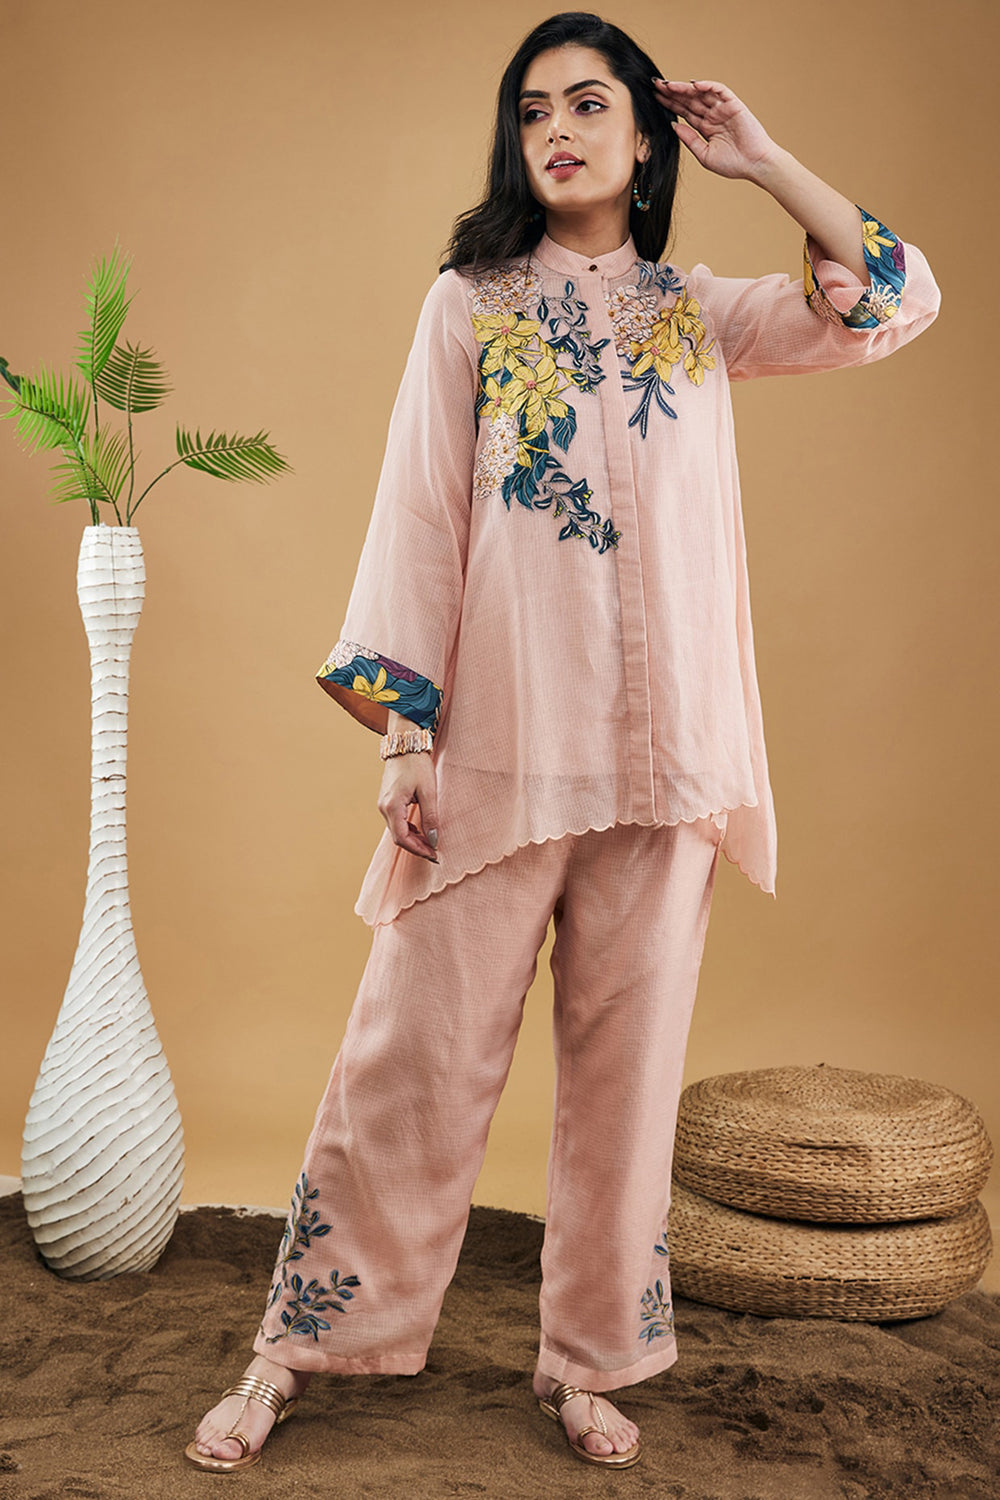 Zinnia Applique High-Low Shirt With Pants